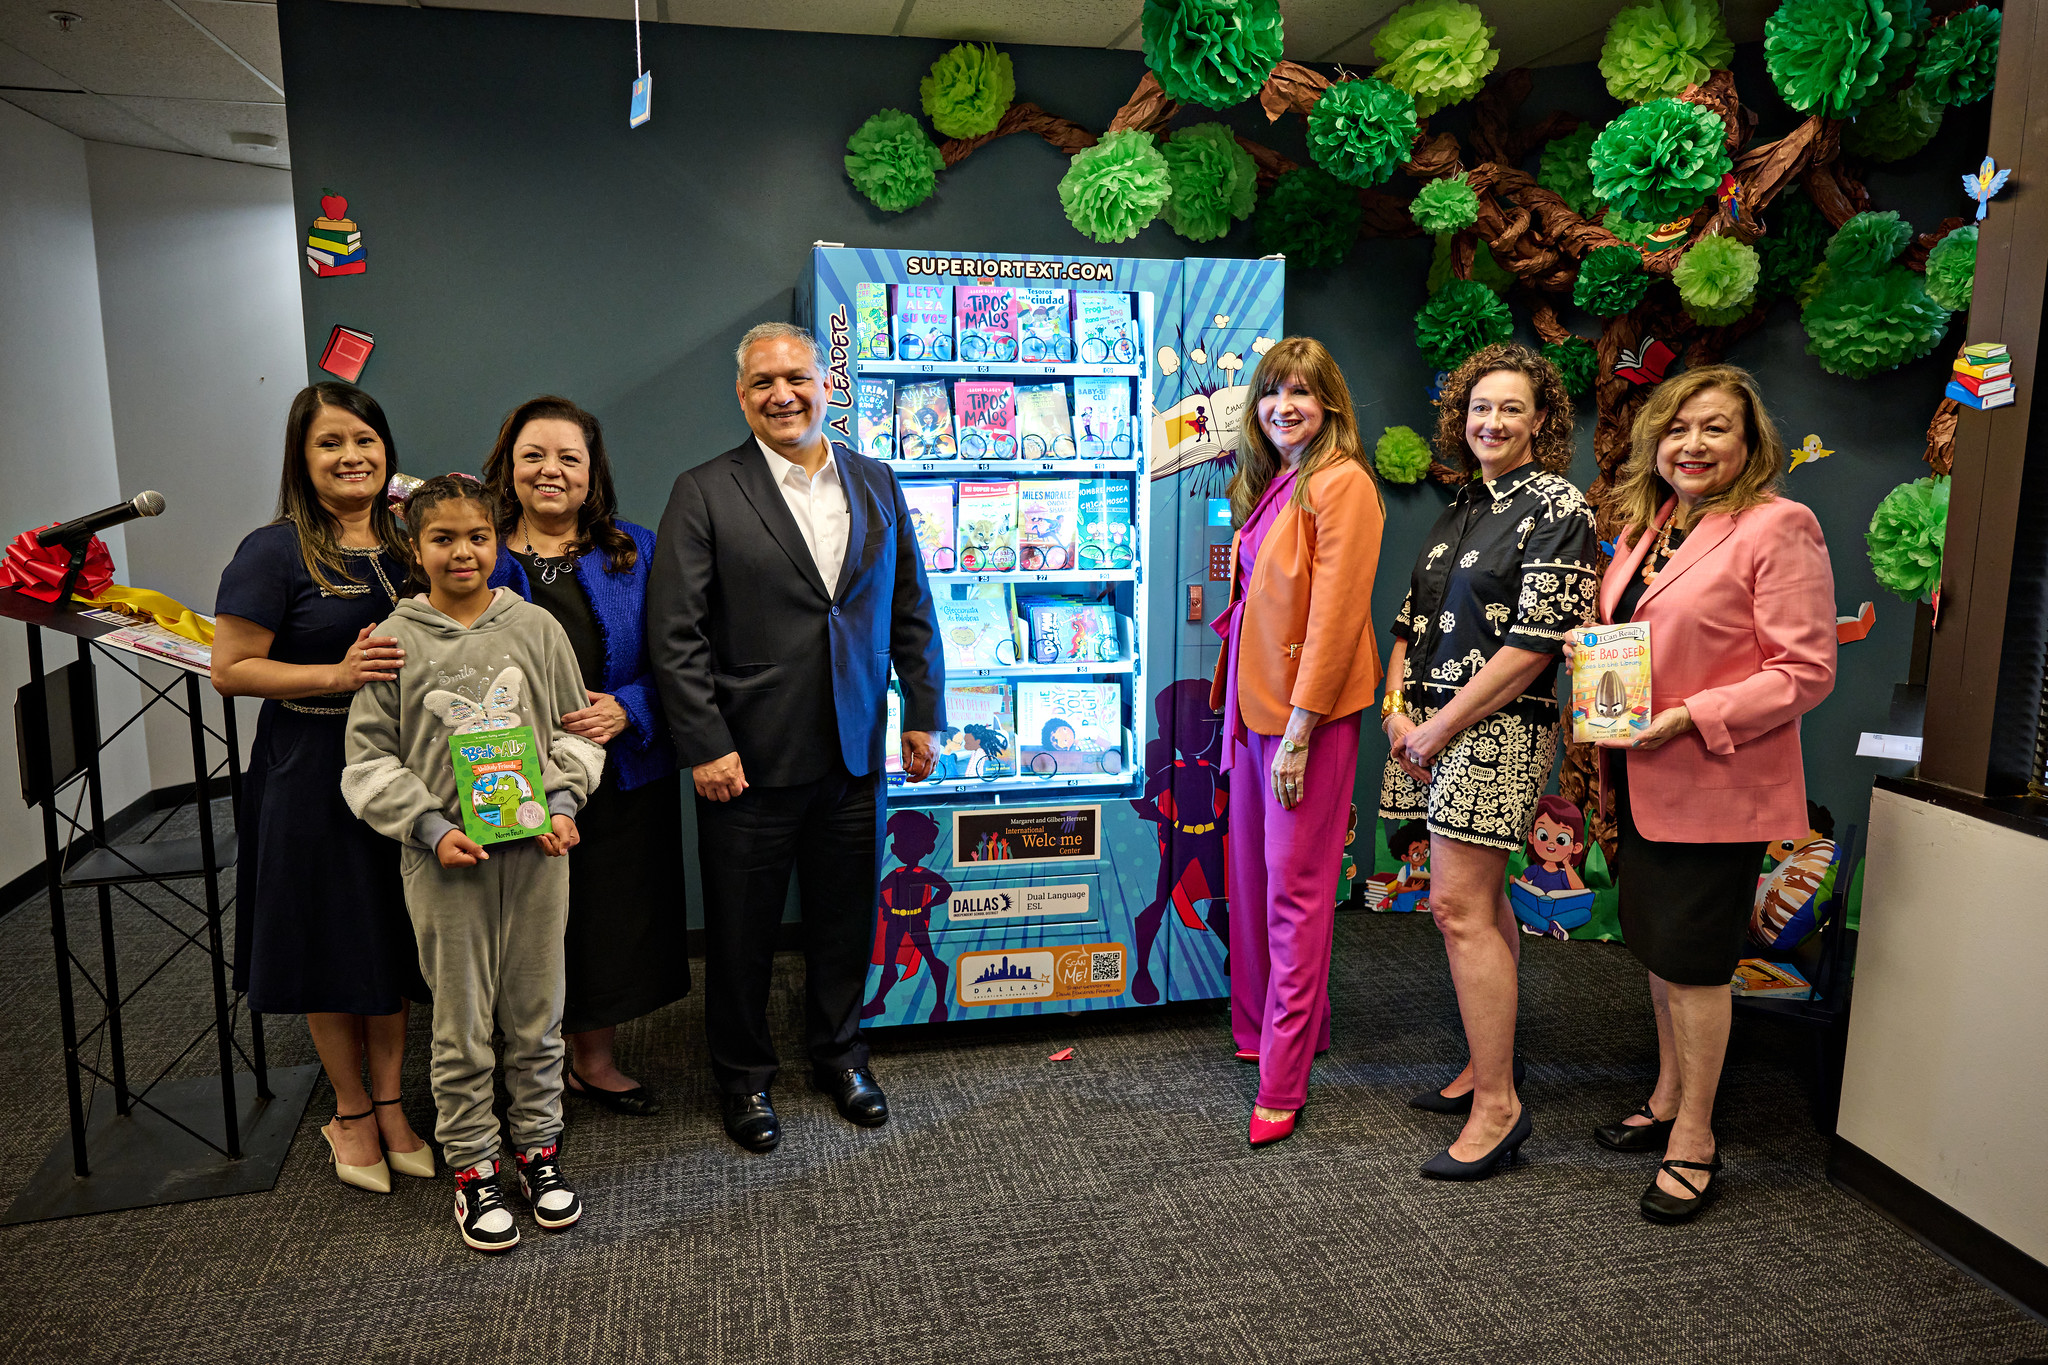 Multilingual book vending machine installed at Dallas ISD central office | The Hub